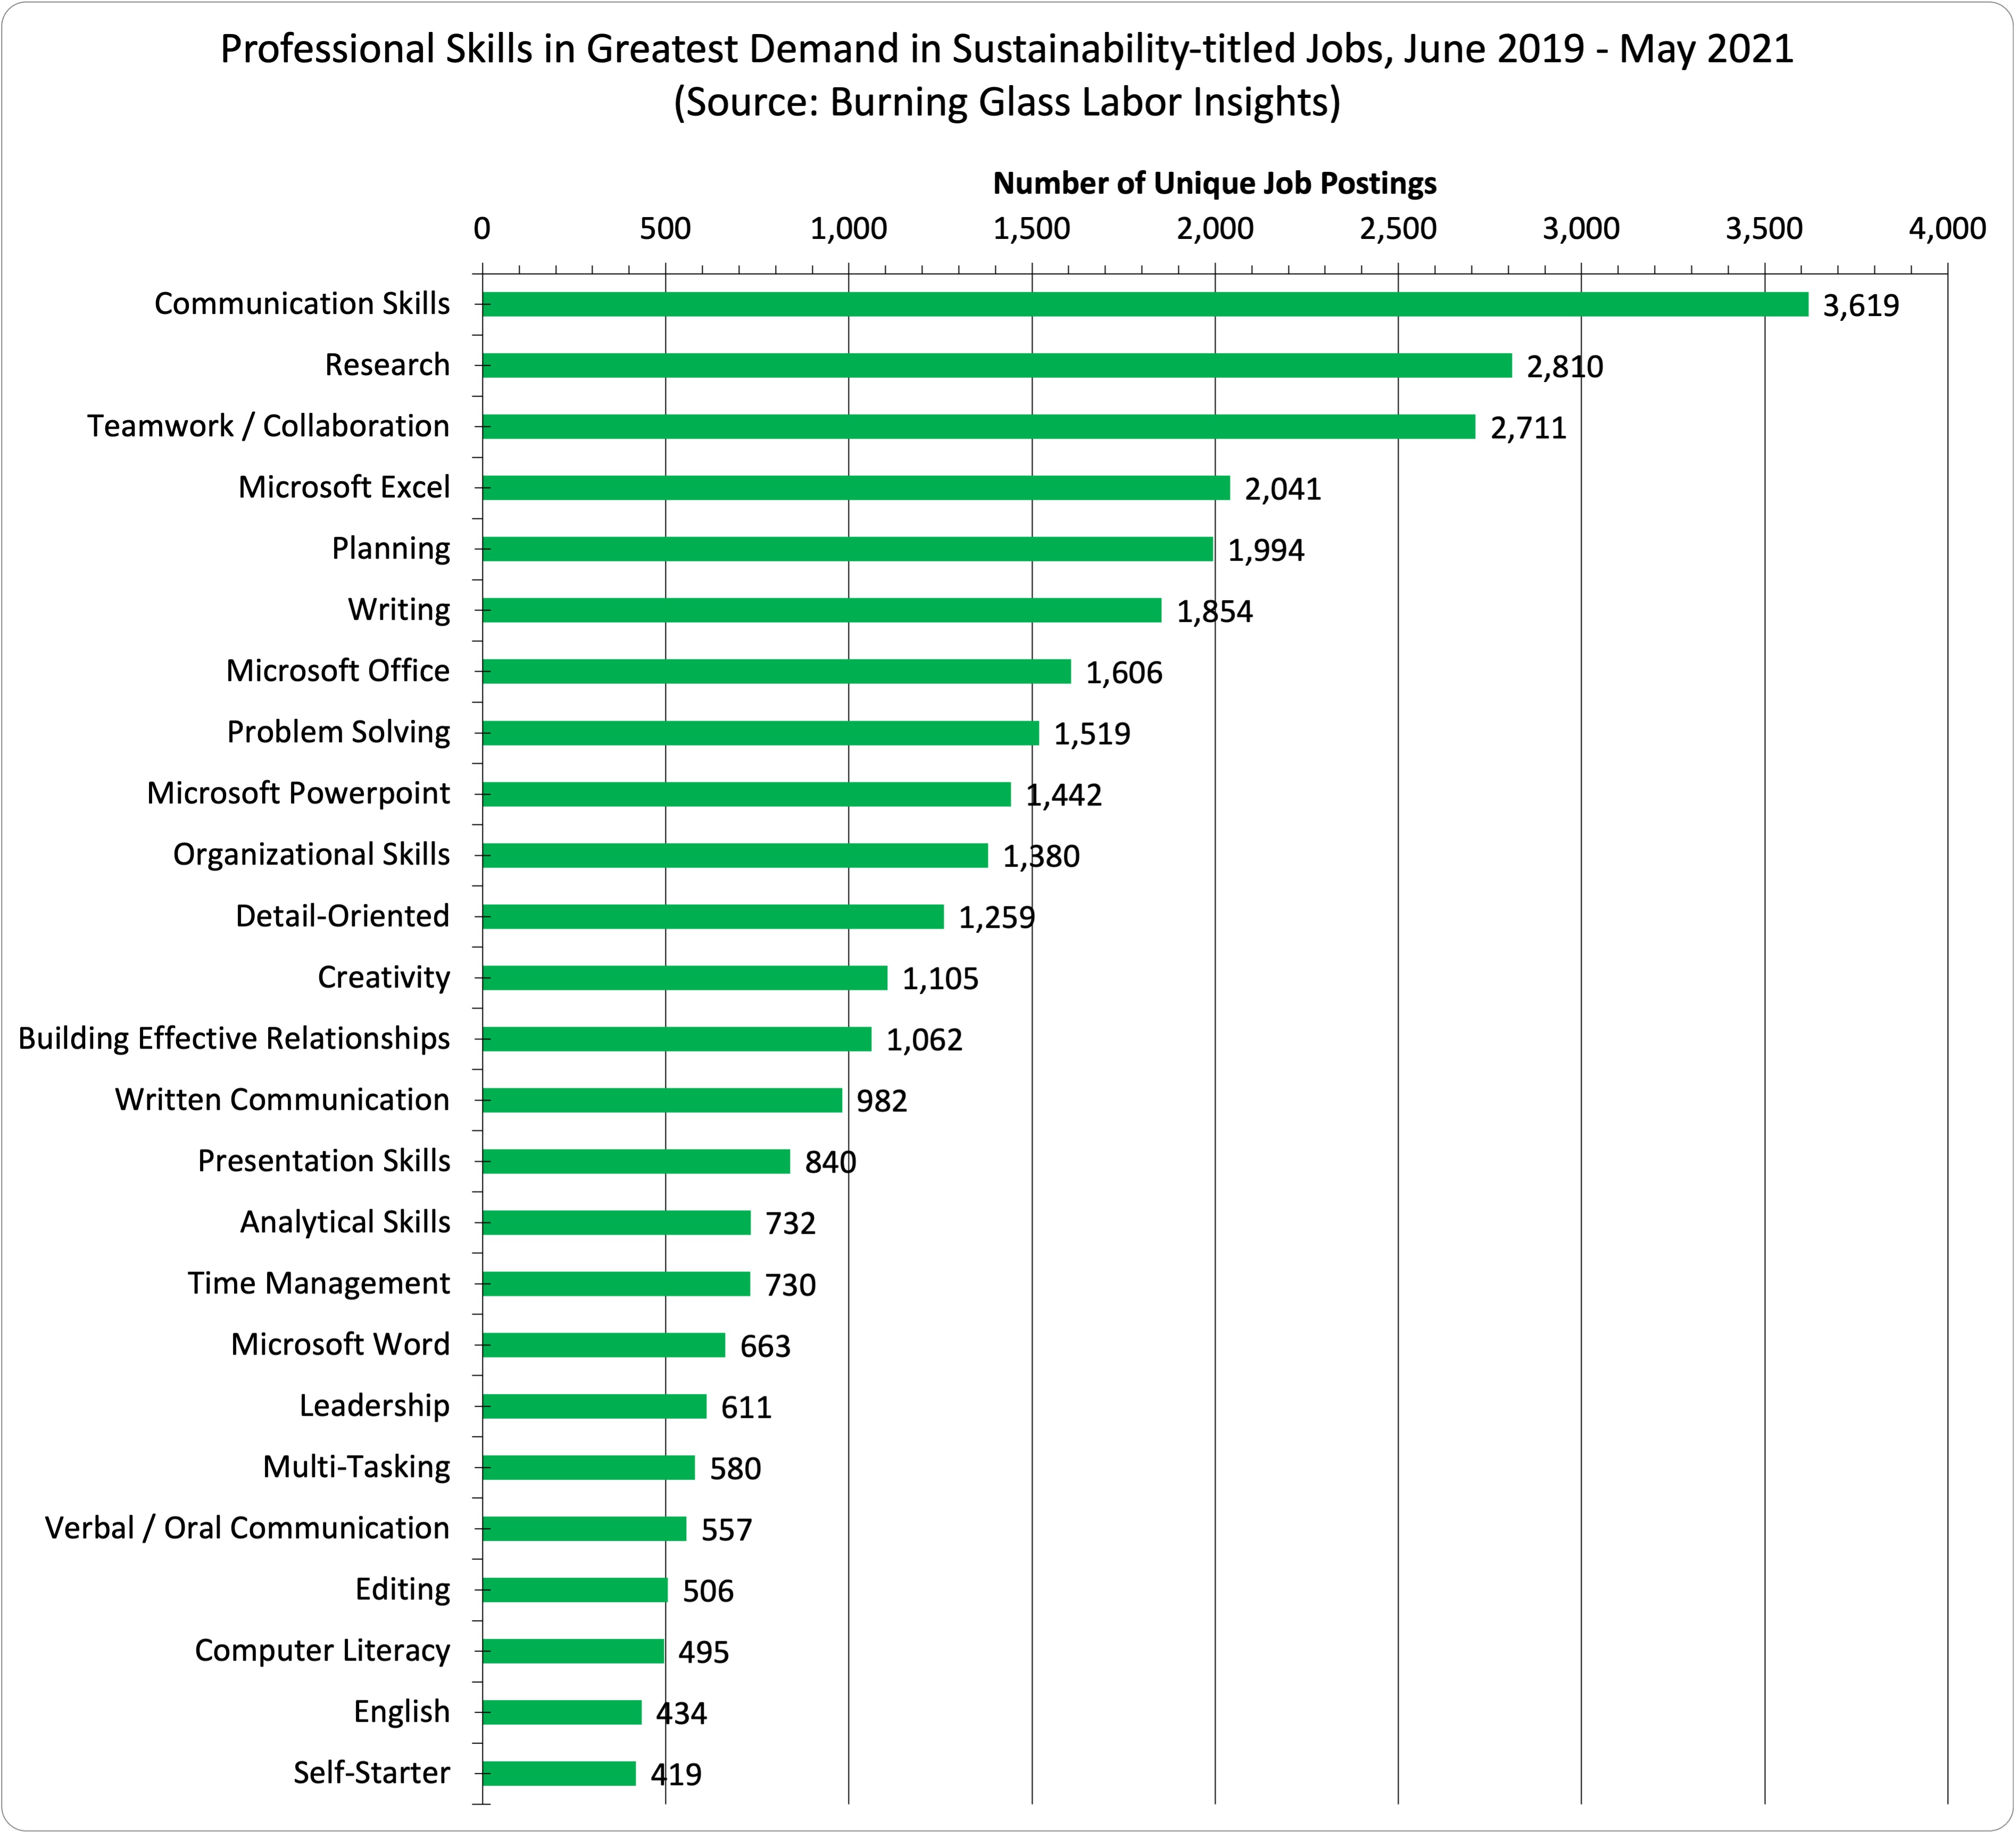 The bar chart below shows the top 20 professional skills for sustainability-titled jobs in job postings made from June 2019 through May 2021